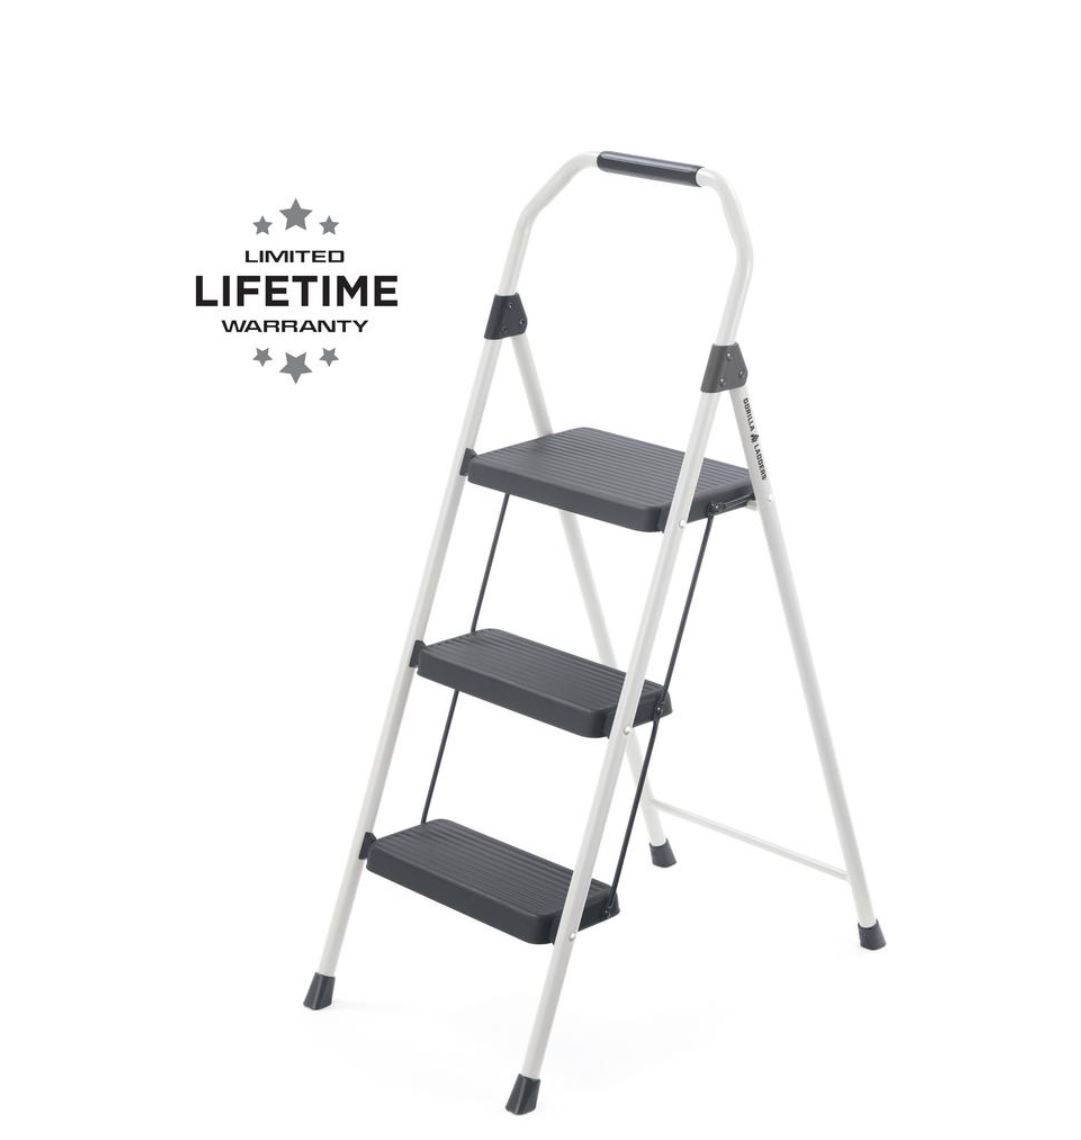 Back in stock - Gorilla 3 Step Ladder - Home Depot $9.98 - Online and In-store